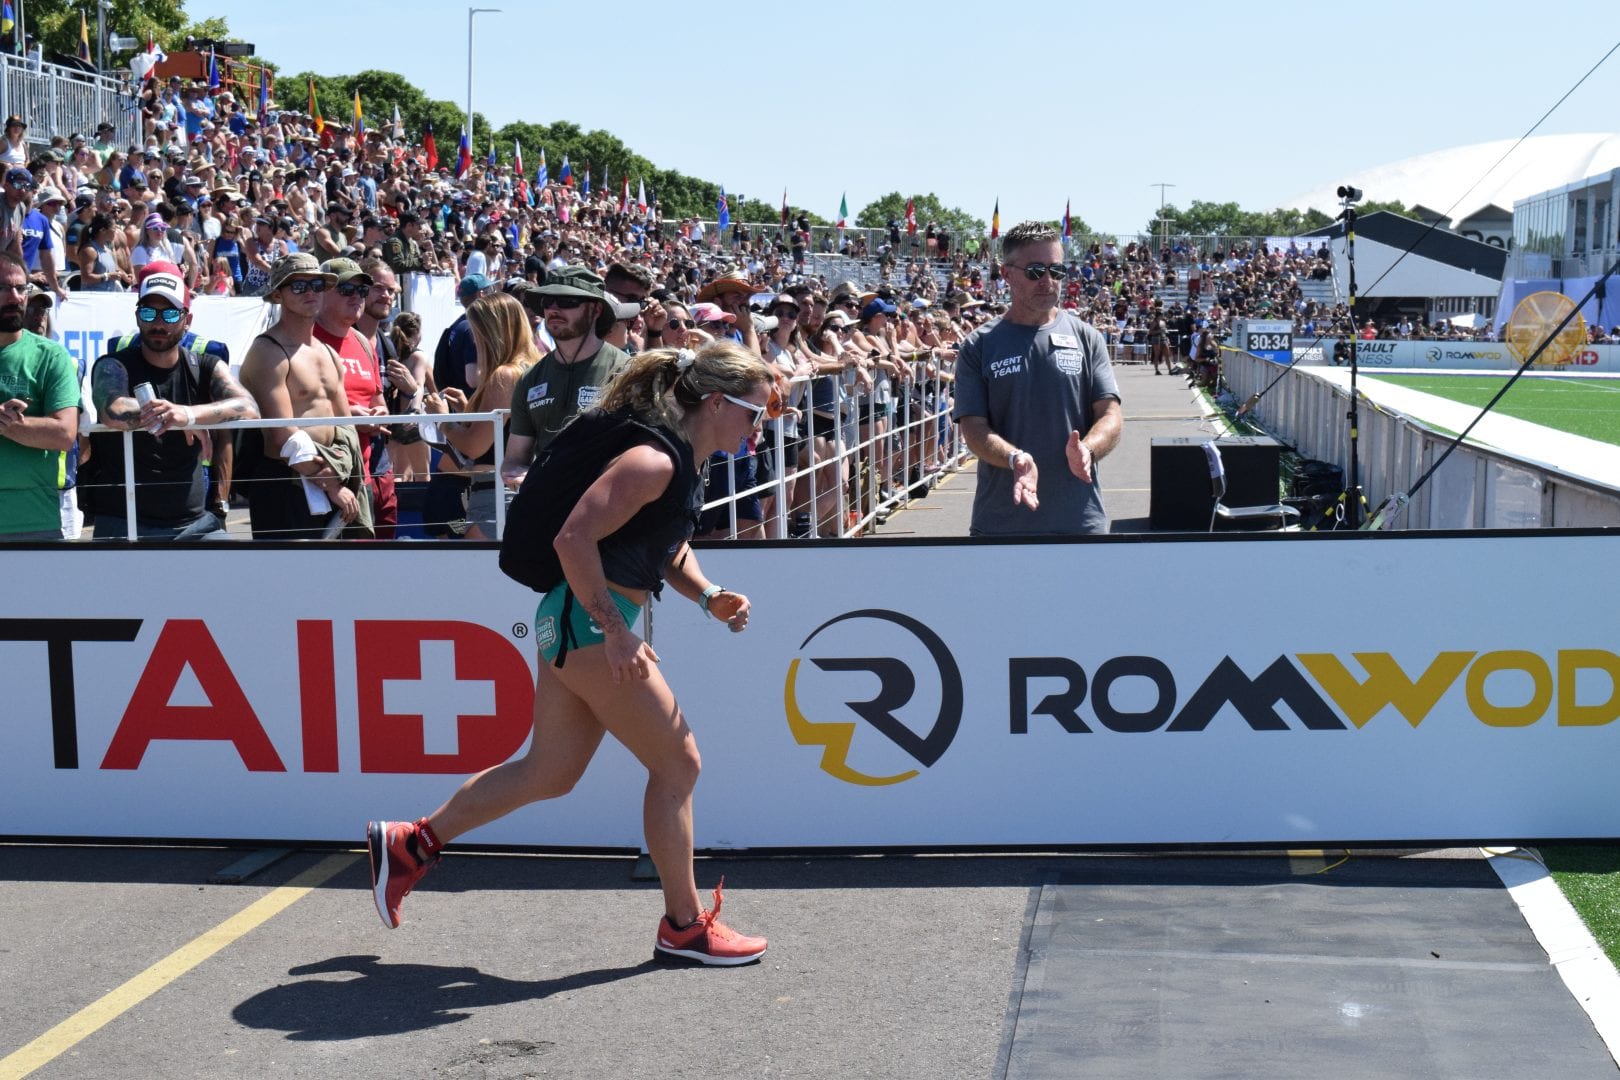 Madeline Sturt completes the Ruck Run event at the 2019 CrossFit Games.